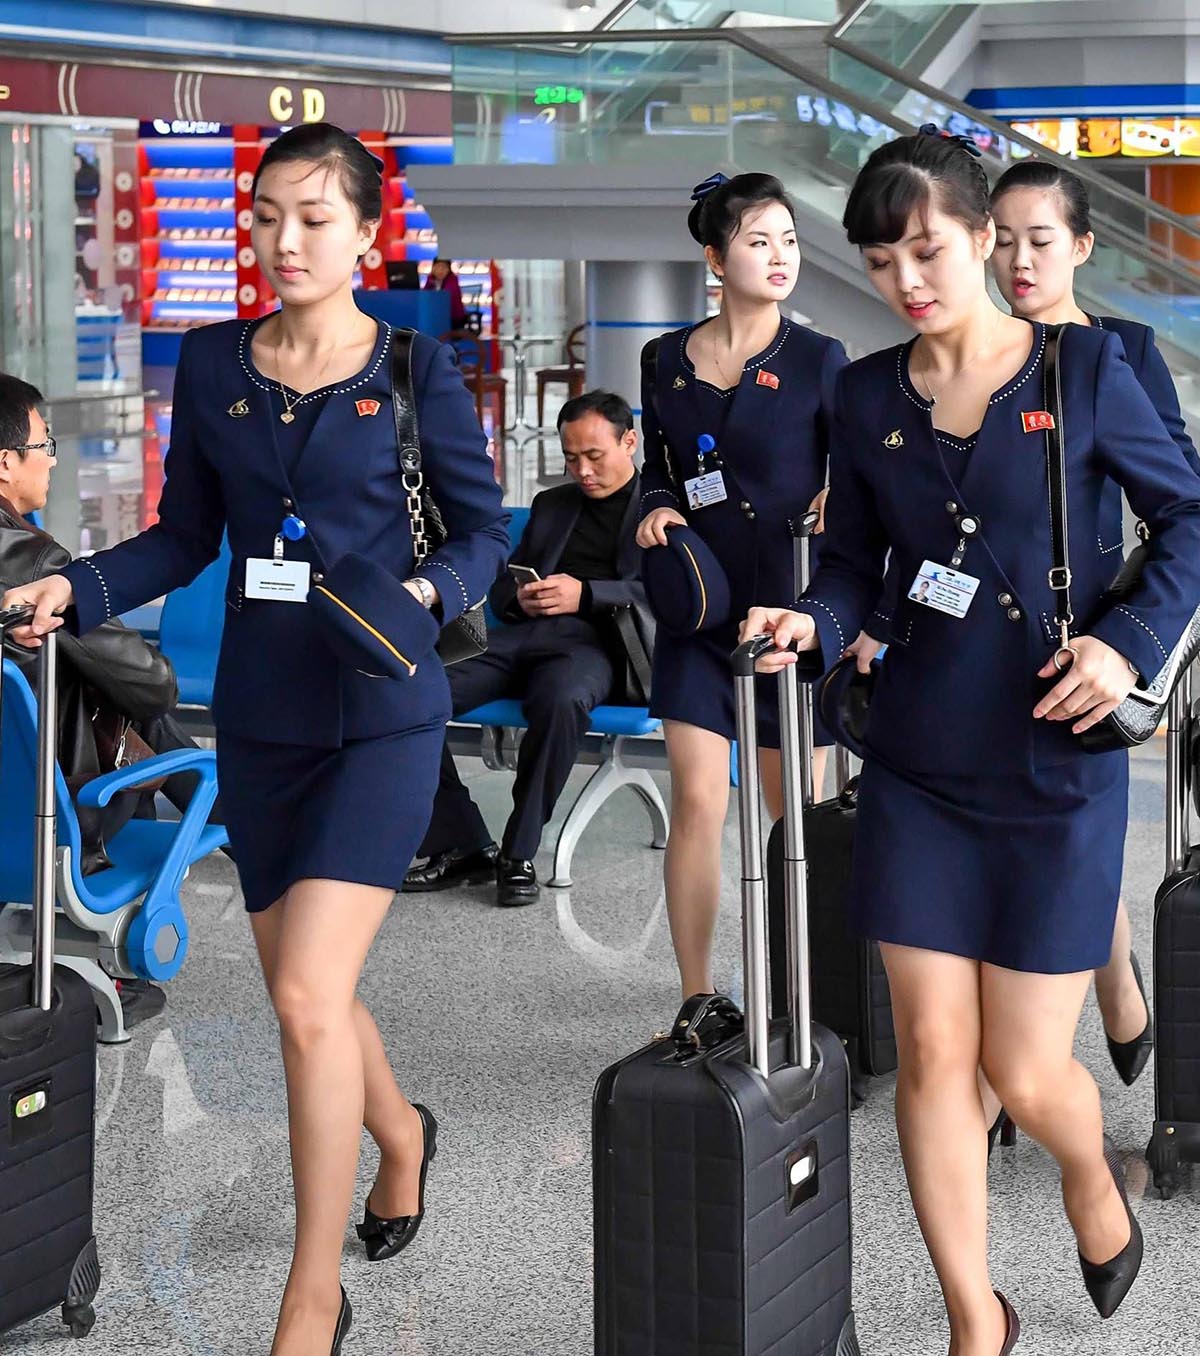 A Japanese flight attendant reported a co-worker to the police